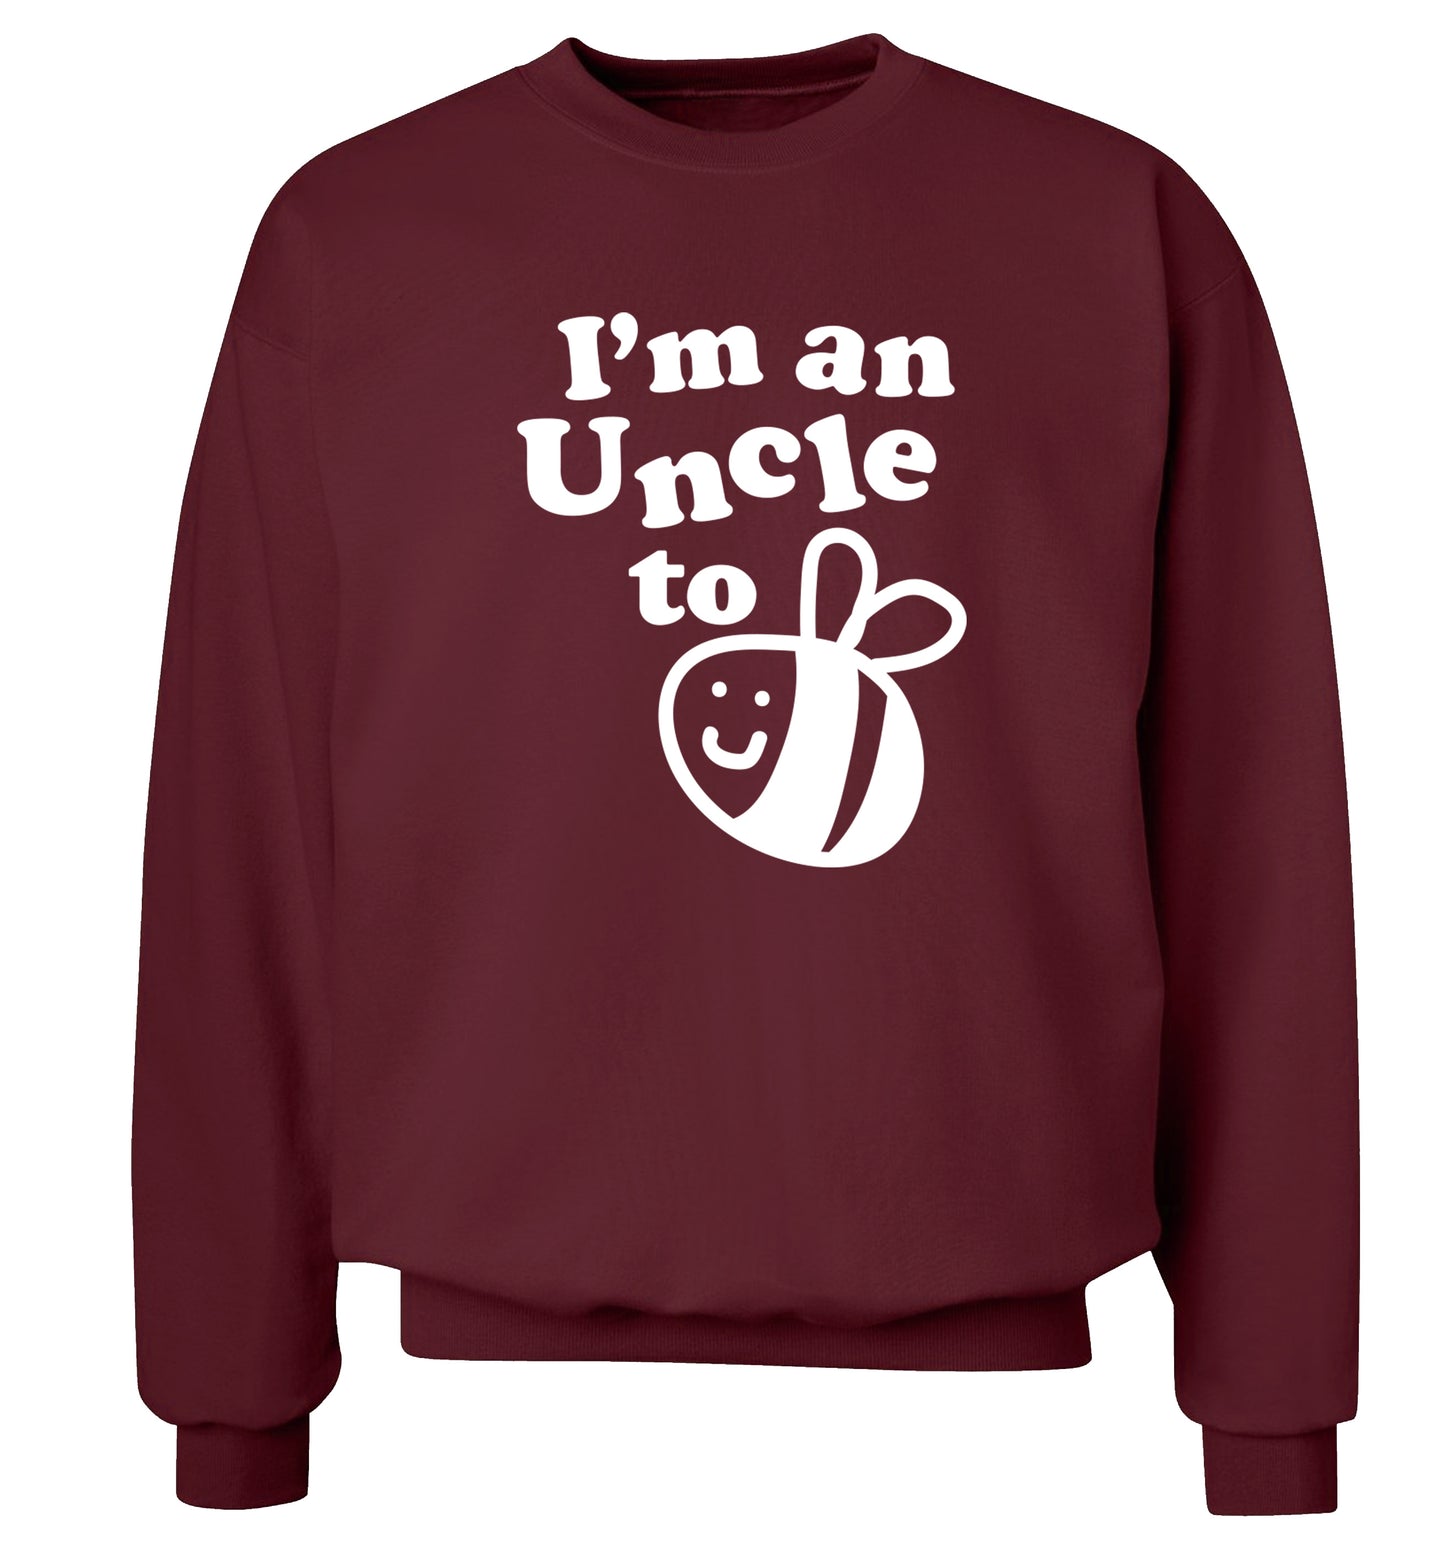 I'm an uncle to be Adult's unisex maroon Sweater 2XL